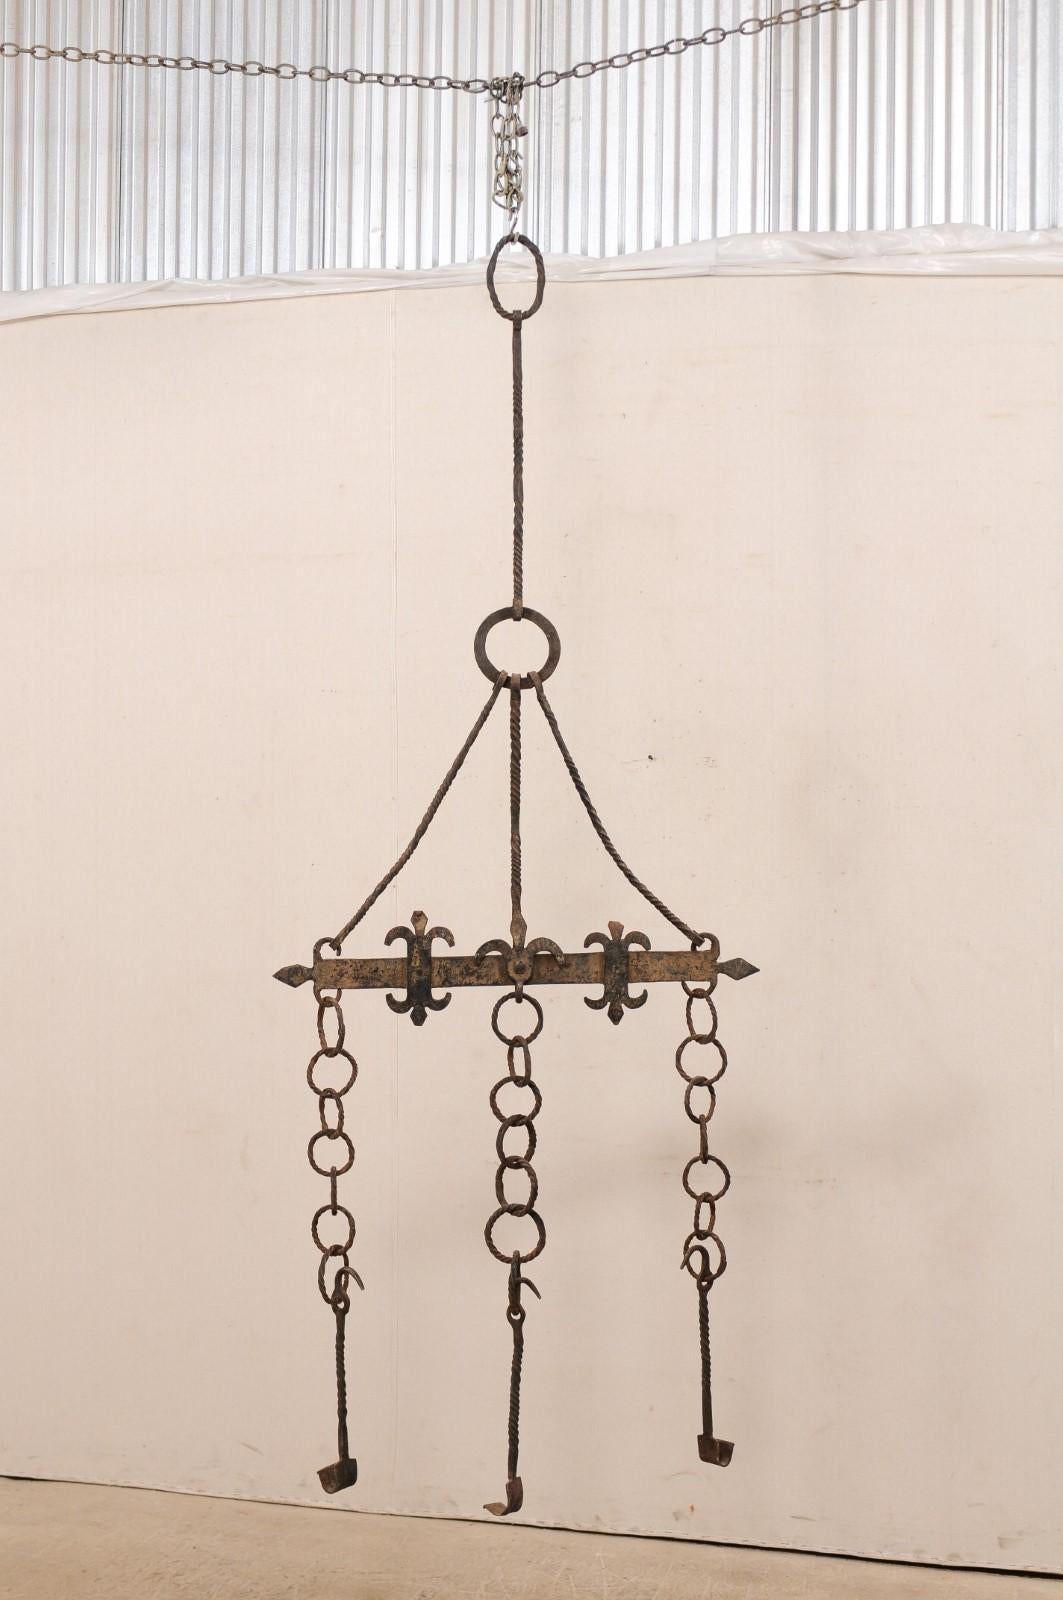 A tall French hanging iron fireplace accessory from the 18th century. This fabulous antique fireplace accessory piece from France, when hung, is approximately 7.5 feet in height and roughly 3 feet wide. It features a horizontal bar, adorn in